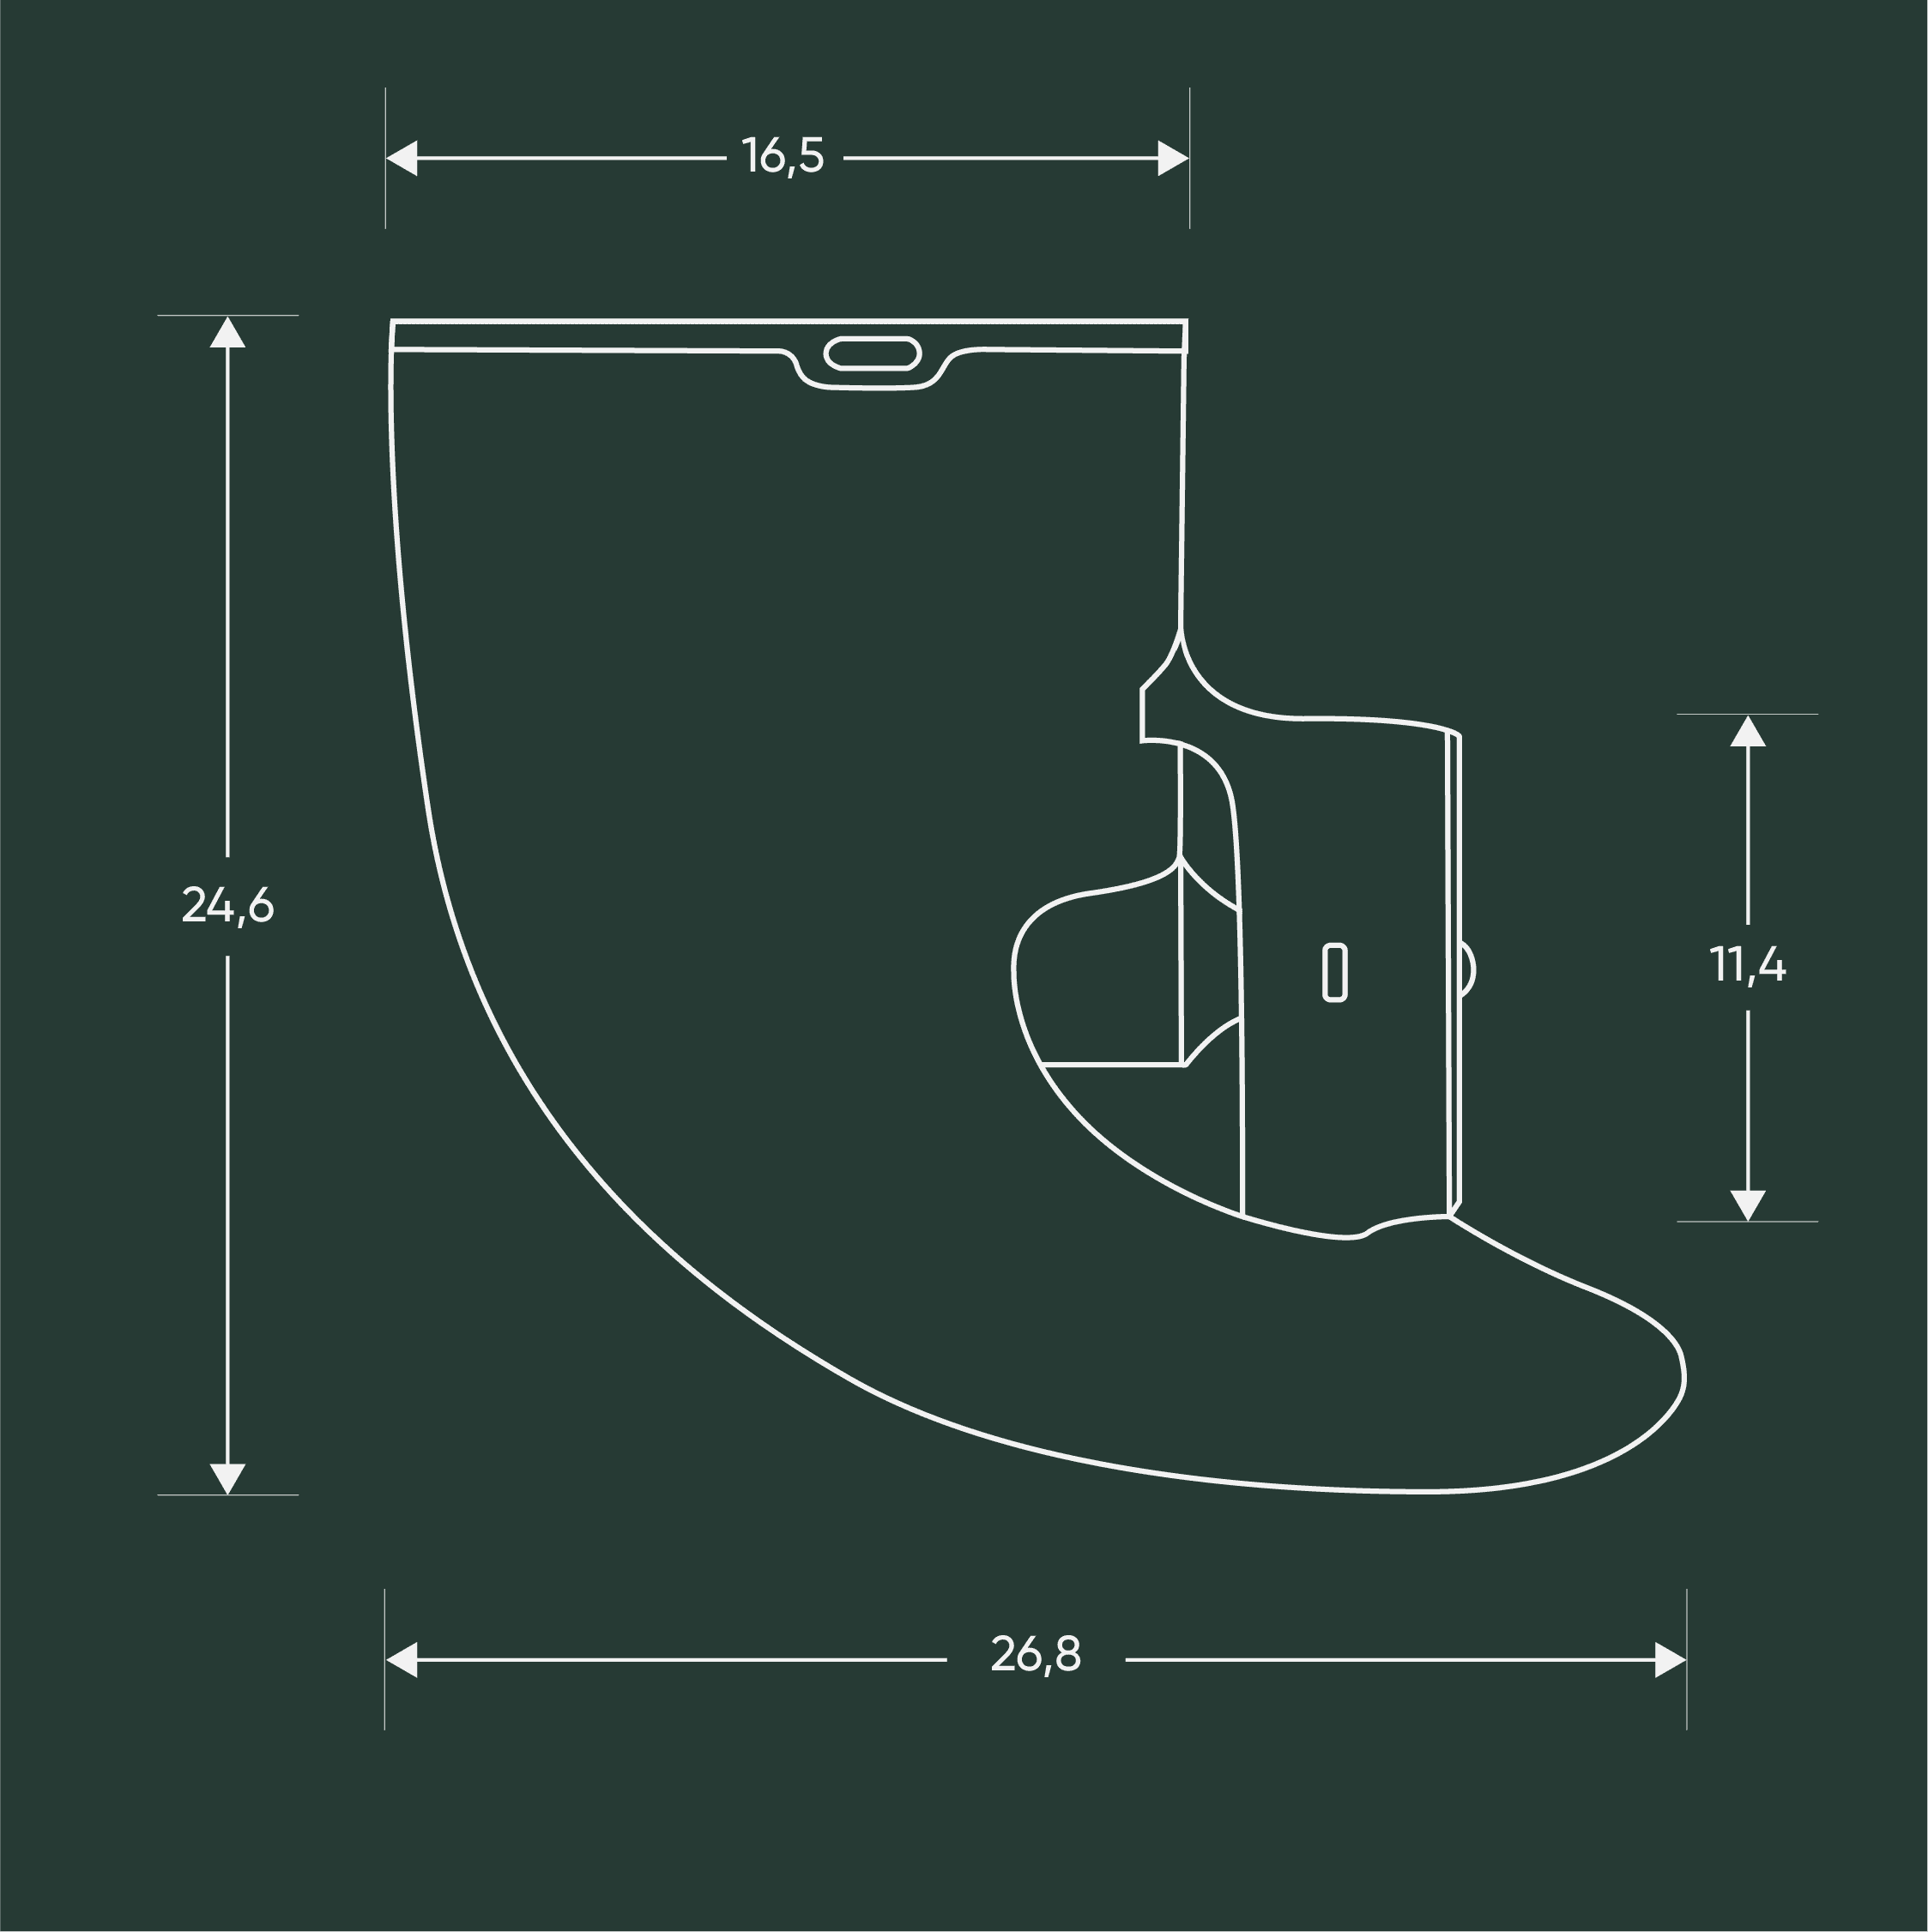 A technical drawing with the dimensions of the fin 2.0: top length: 16.5 cm, height: 24.6 cm, bottom length: 26.8 cm, height of the drive: 11.4 cm